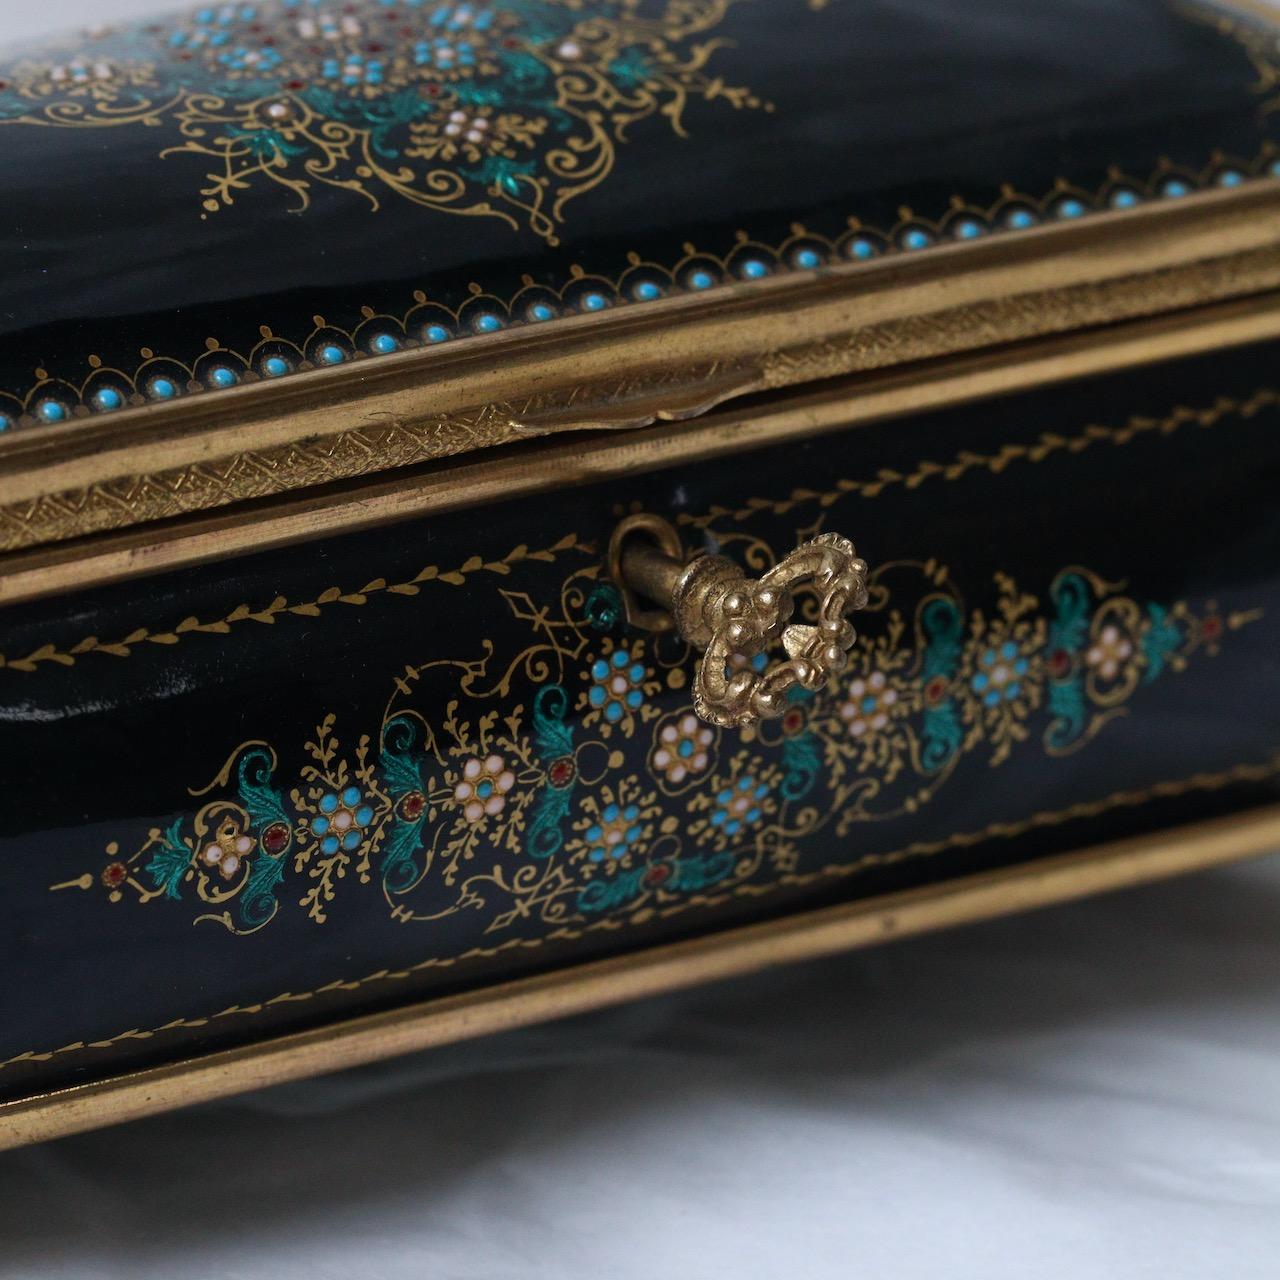 19th Century French Enamel and Ormolu-Mounted Jewelry Casket 6